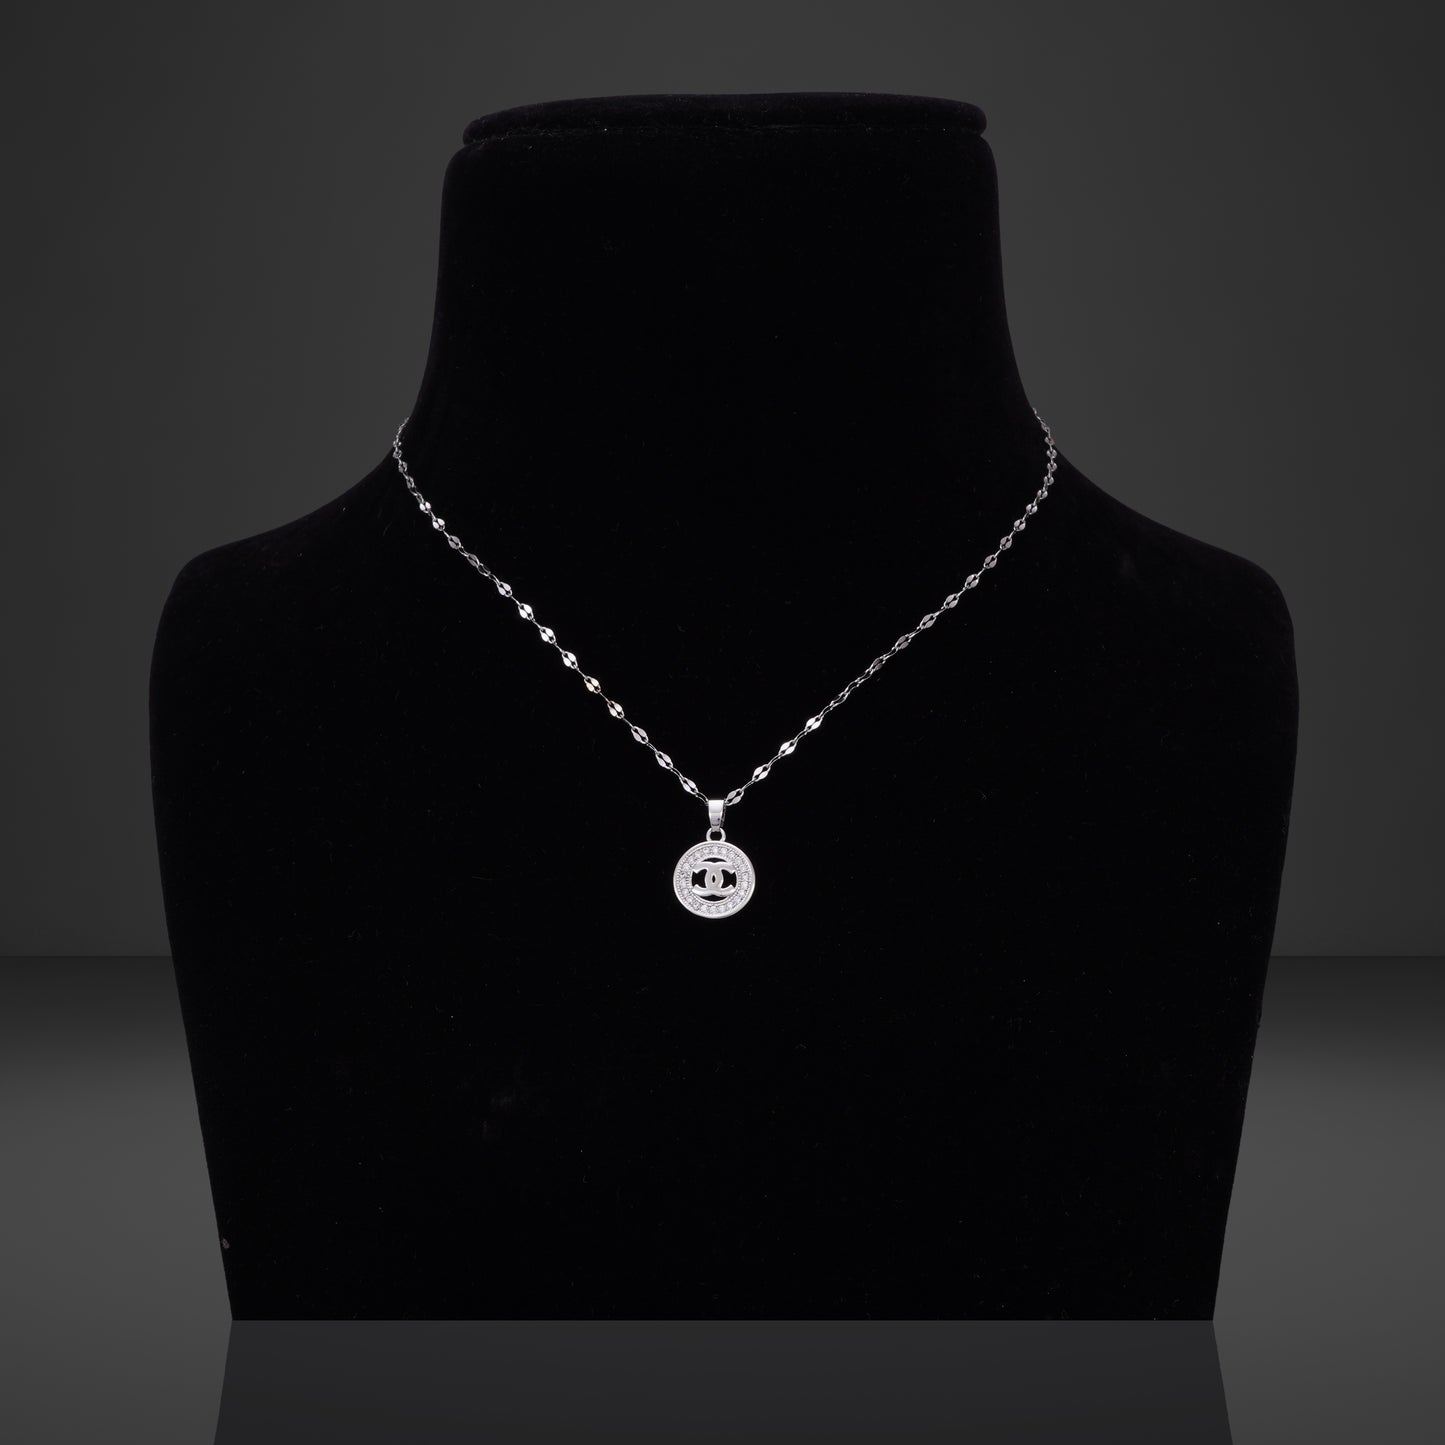 CURLY DIAMOND SILVER NECKLACE